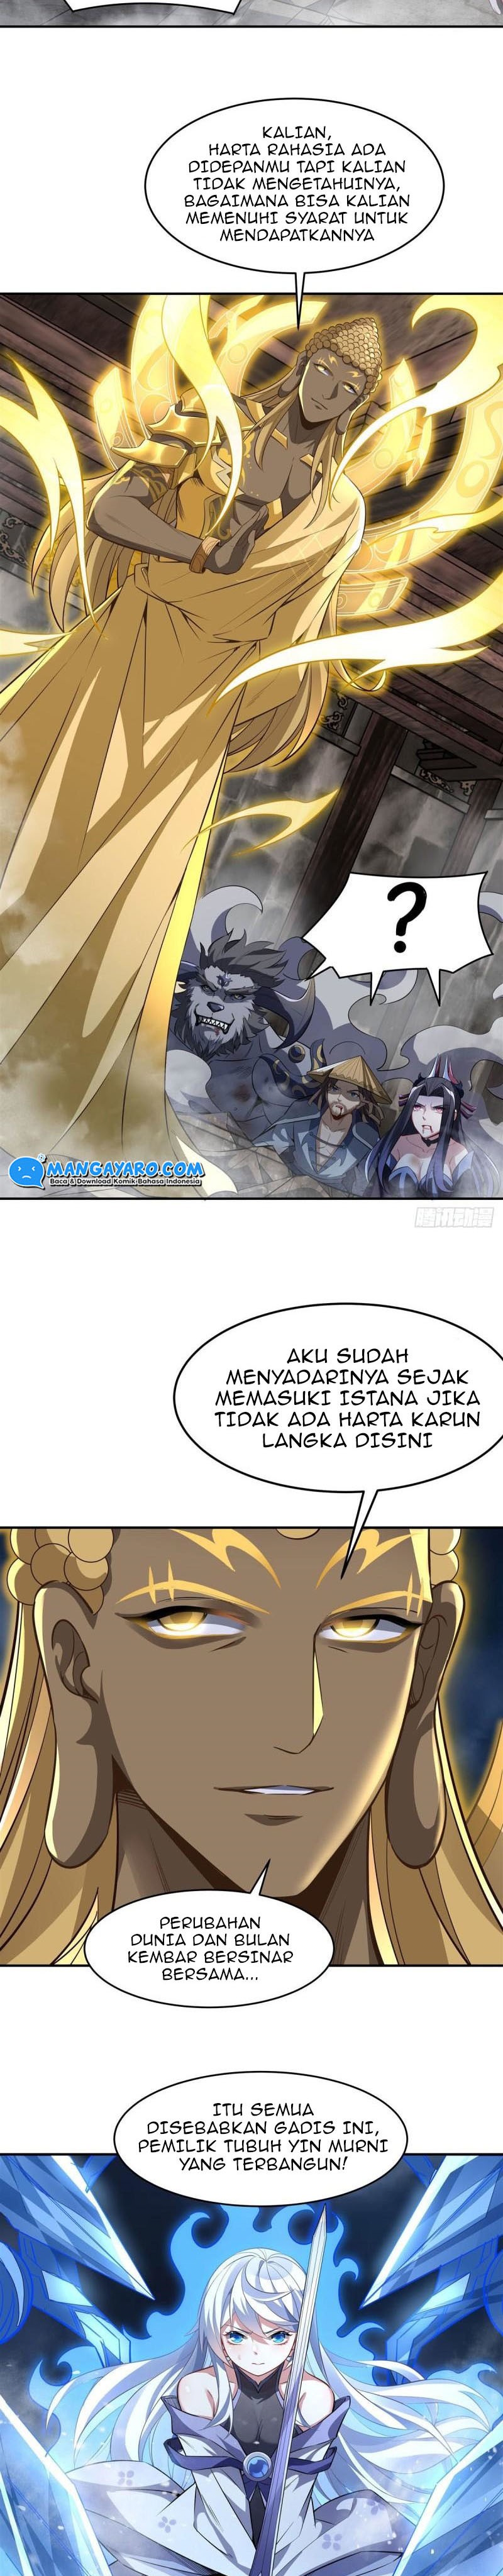 Dilarang COPAS - situs resmi www.mangacanblog.com - Komik my female apprentices are all big shots from the future 067 - chapter 67 68 Indonesia my female apprentices are all big shots from the future 067 - chapter 67 Terbaru 8|Baca Manga Komik Indonesia|Mangacan